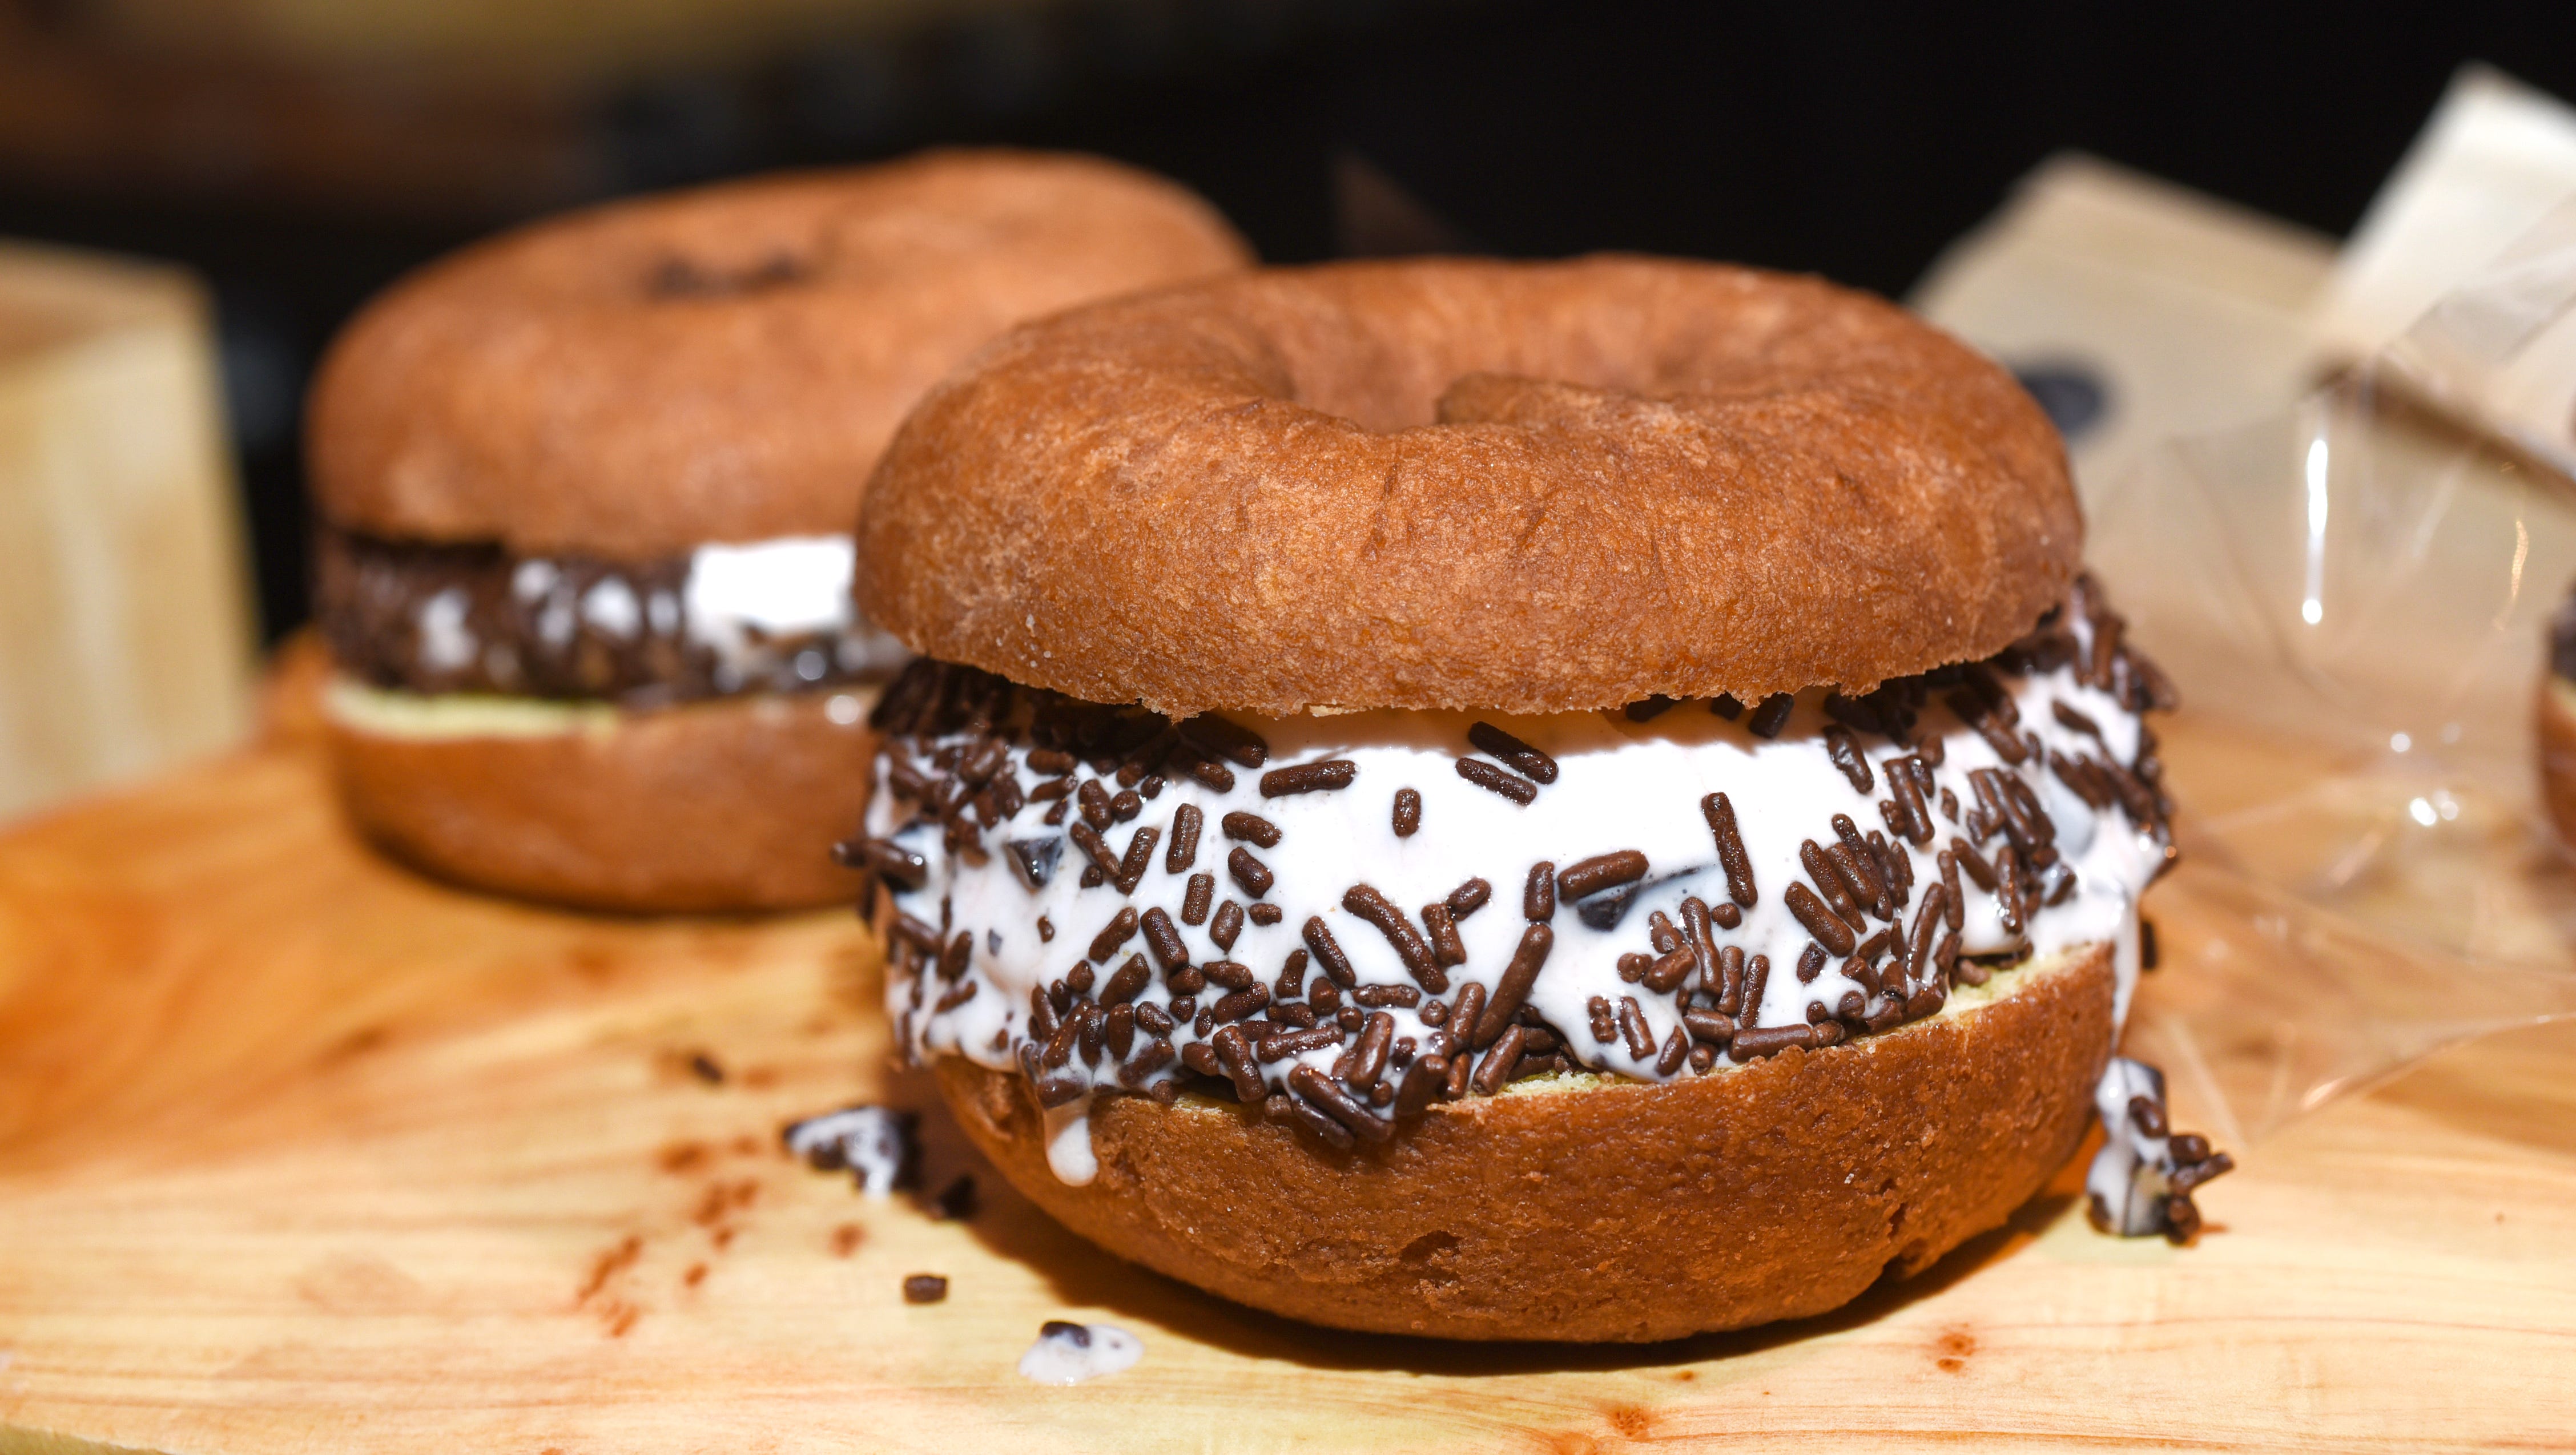 The Donut Ice Cream Sandwich was presented during a media event .